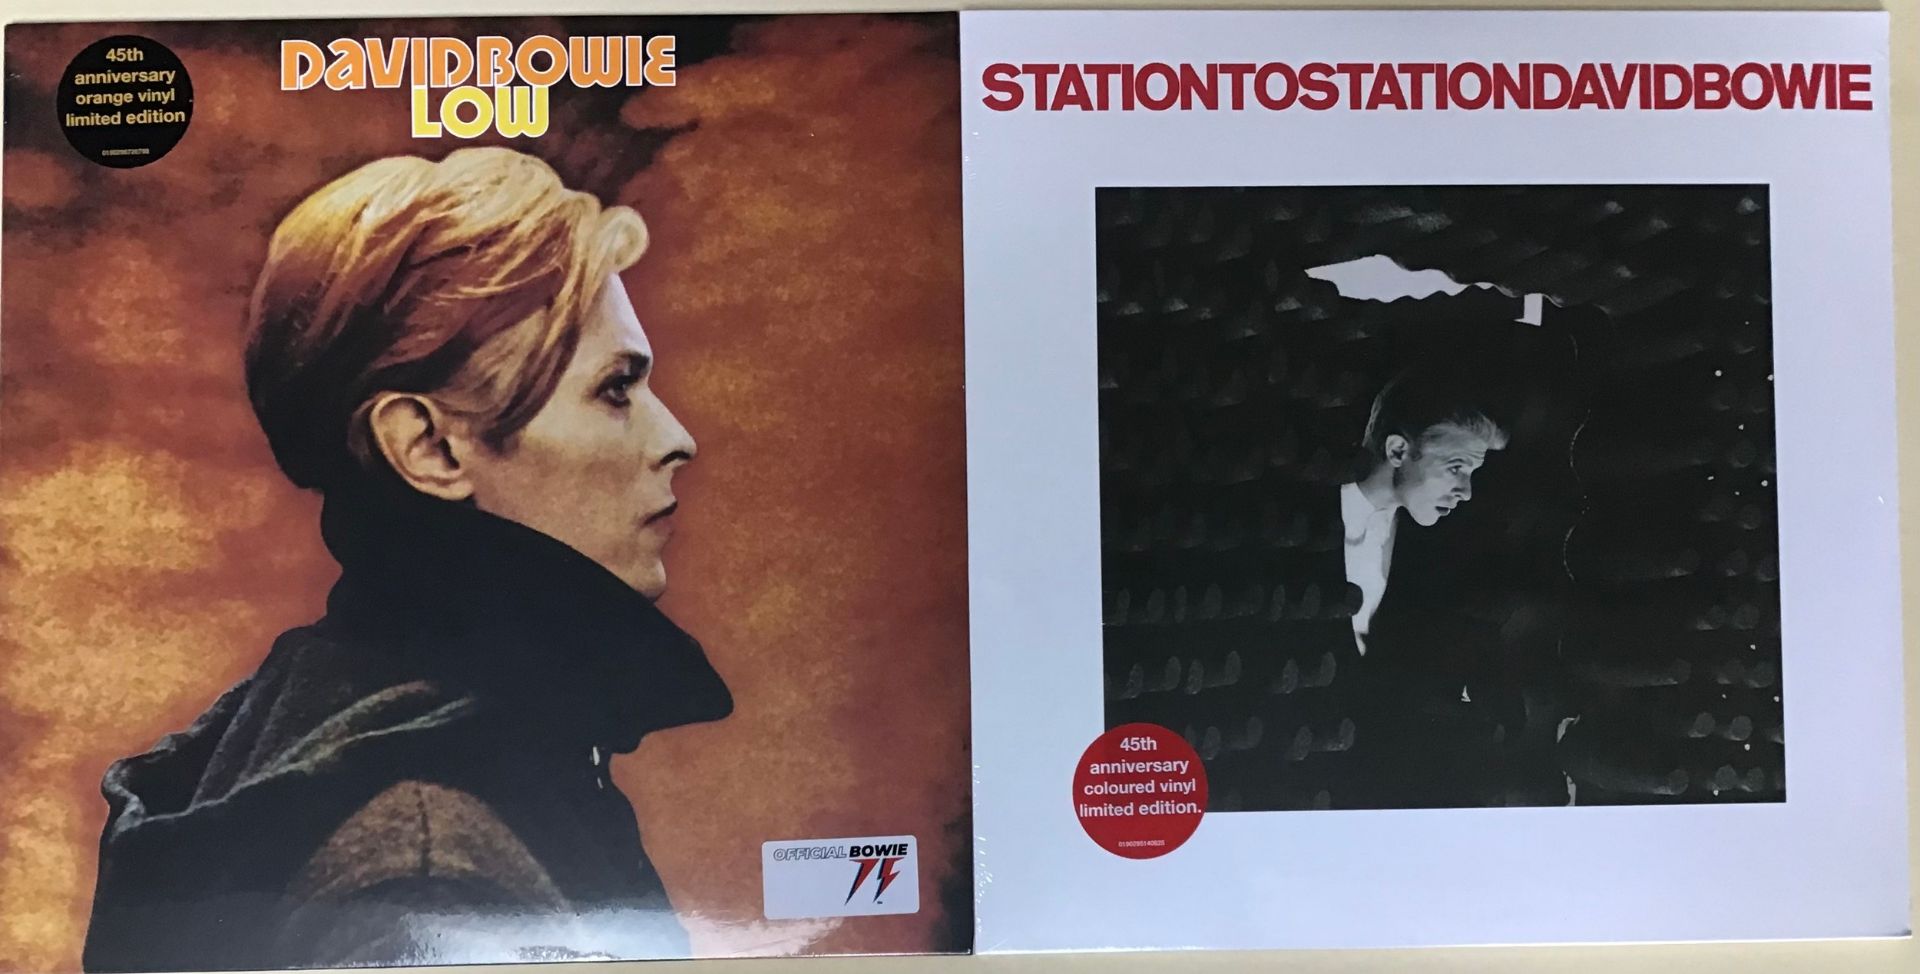 DAVID BOWIE LP RECORDS 'LOW & STATION TO STATION' LIMITED COLORED EDITION'S. Both albums here come